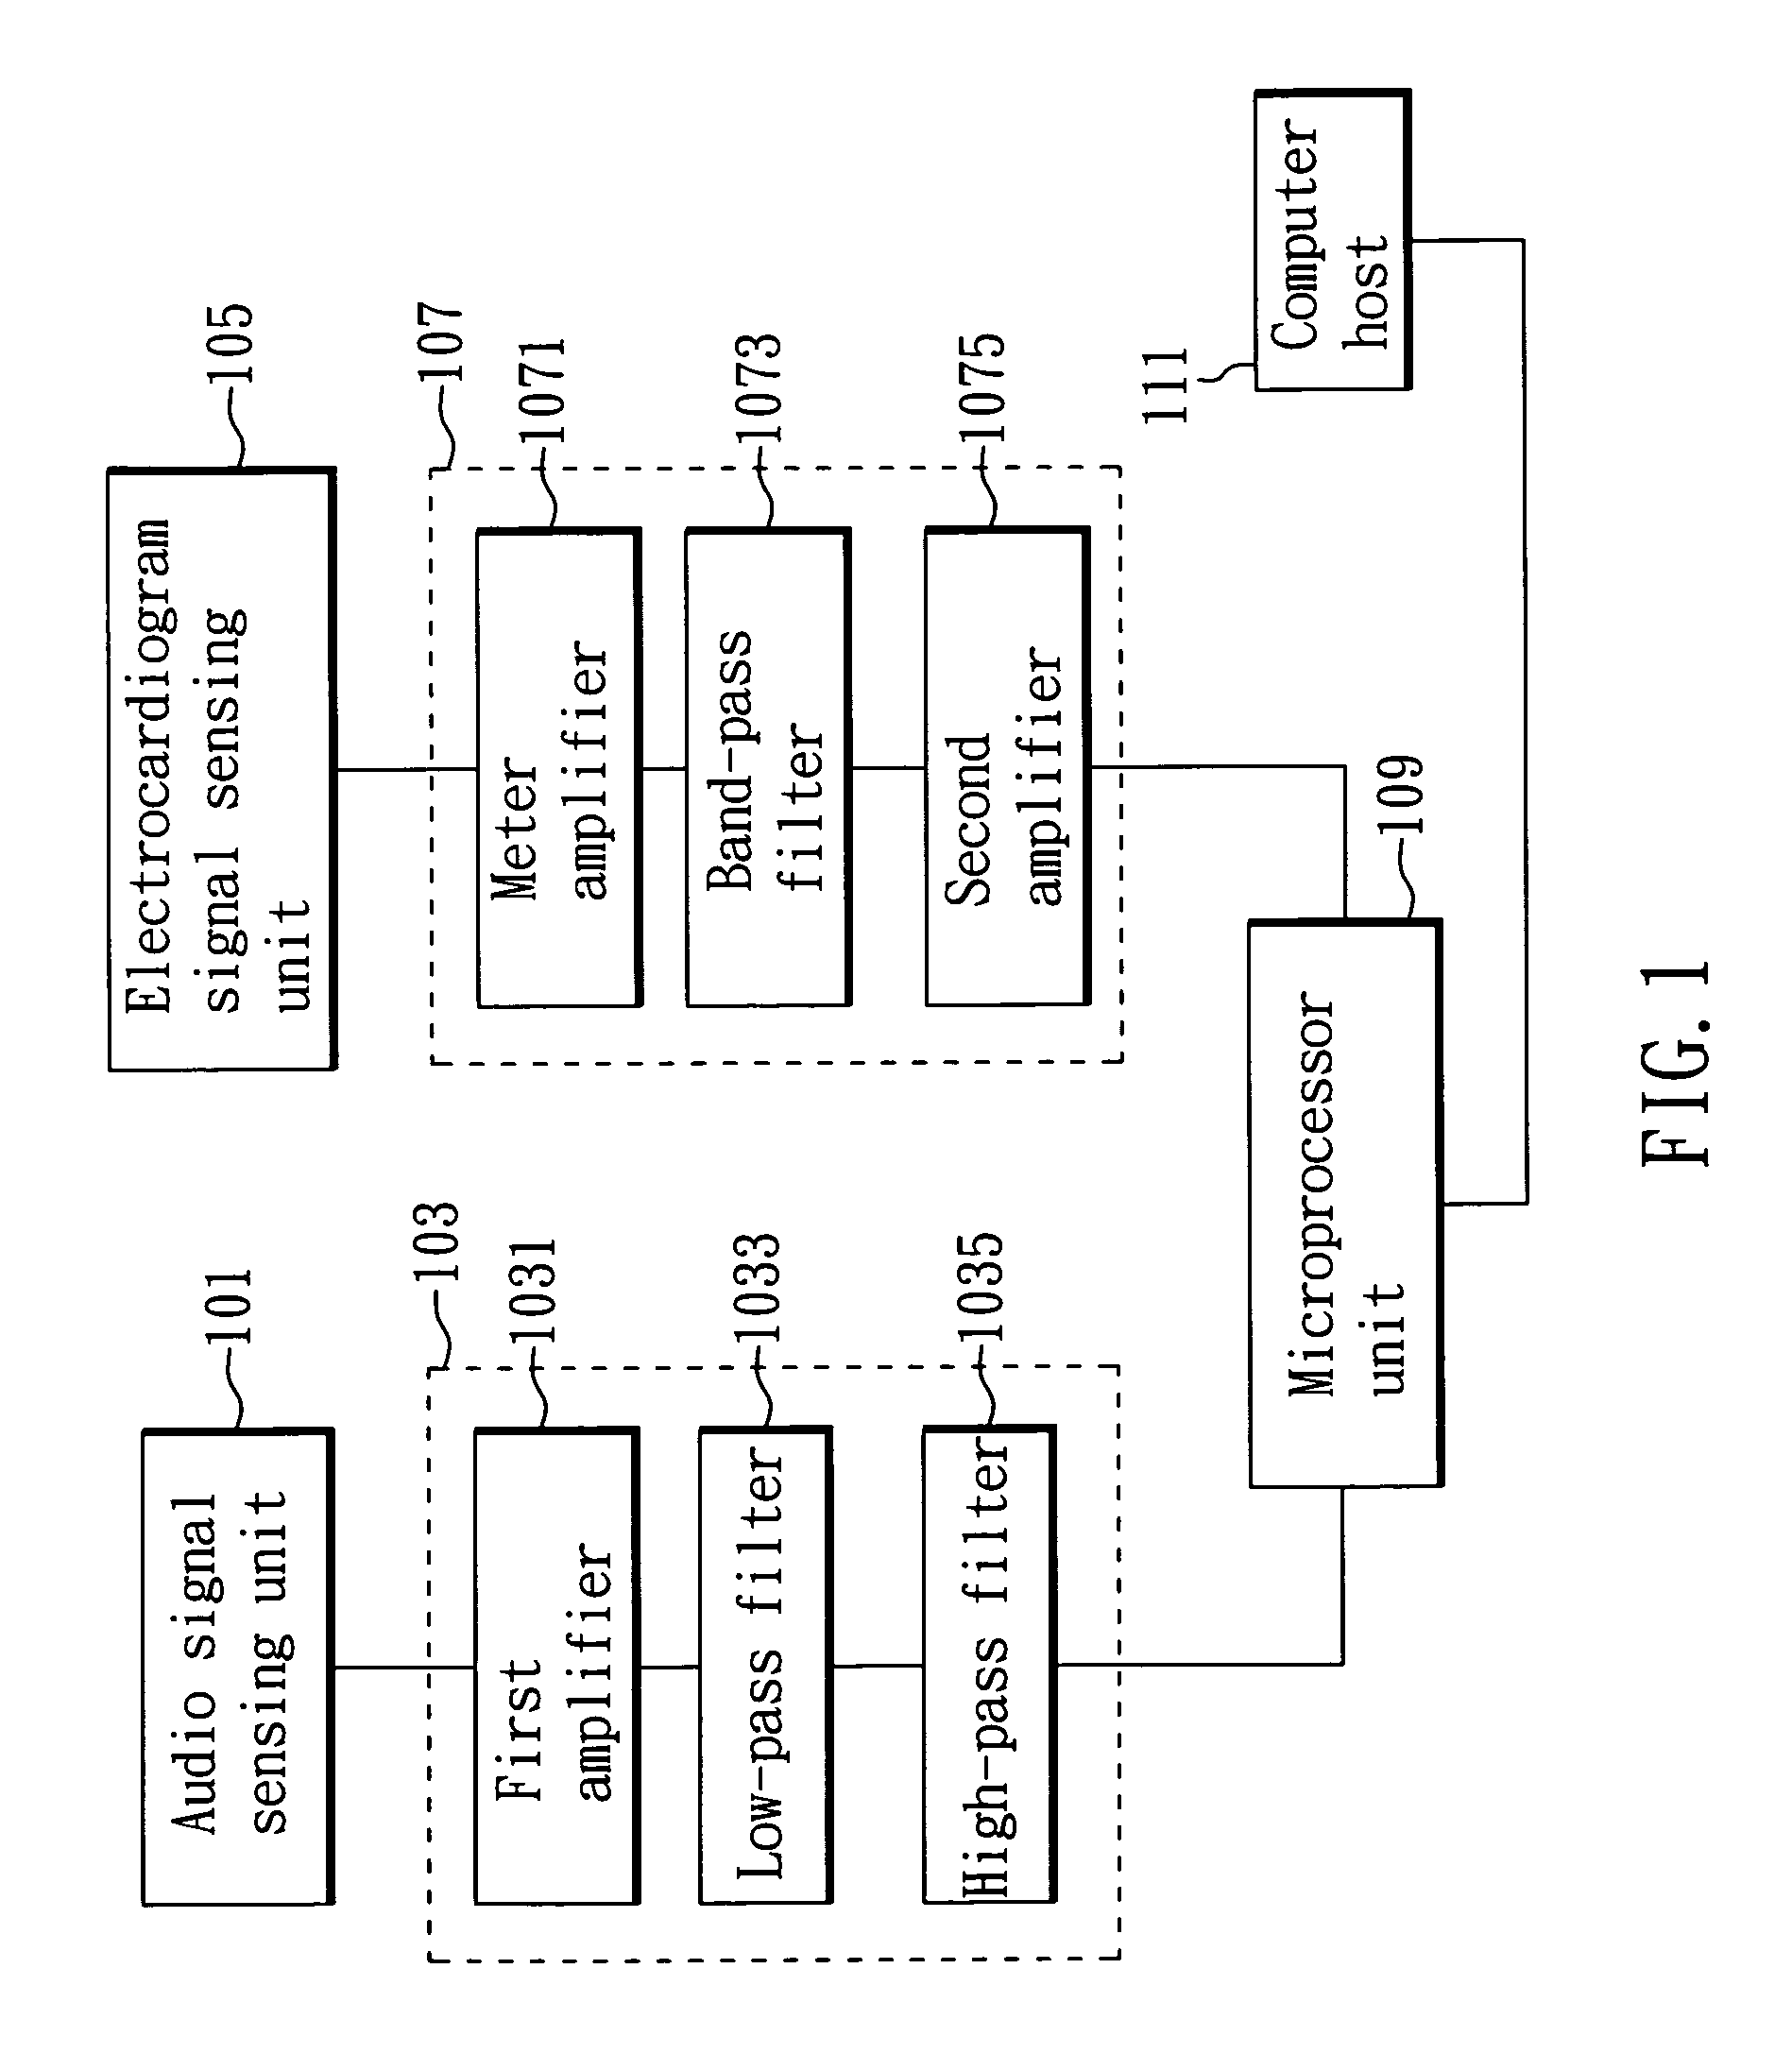 System apparatus for monitoring heart and lung functions